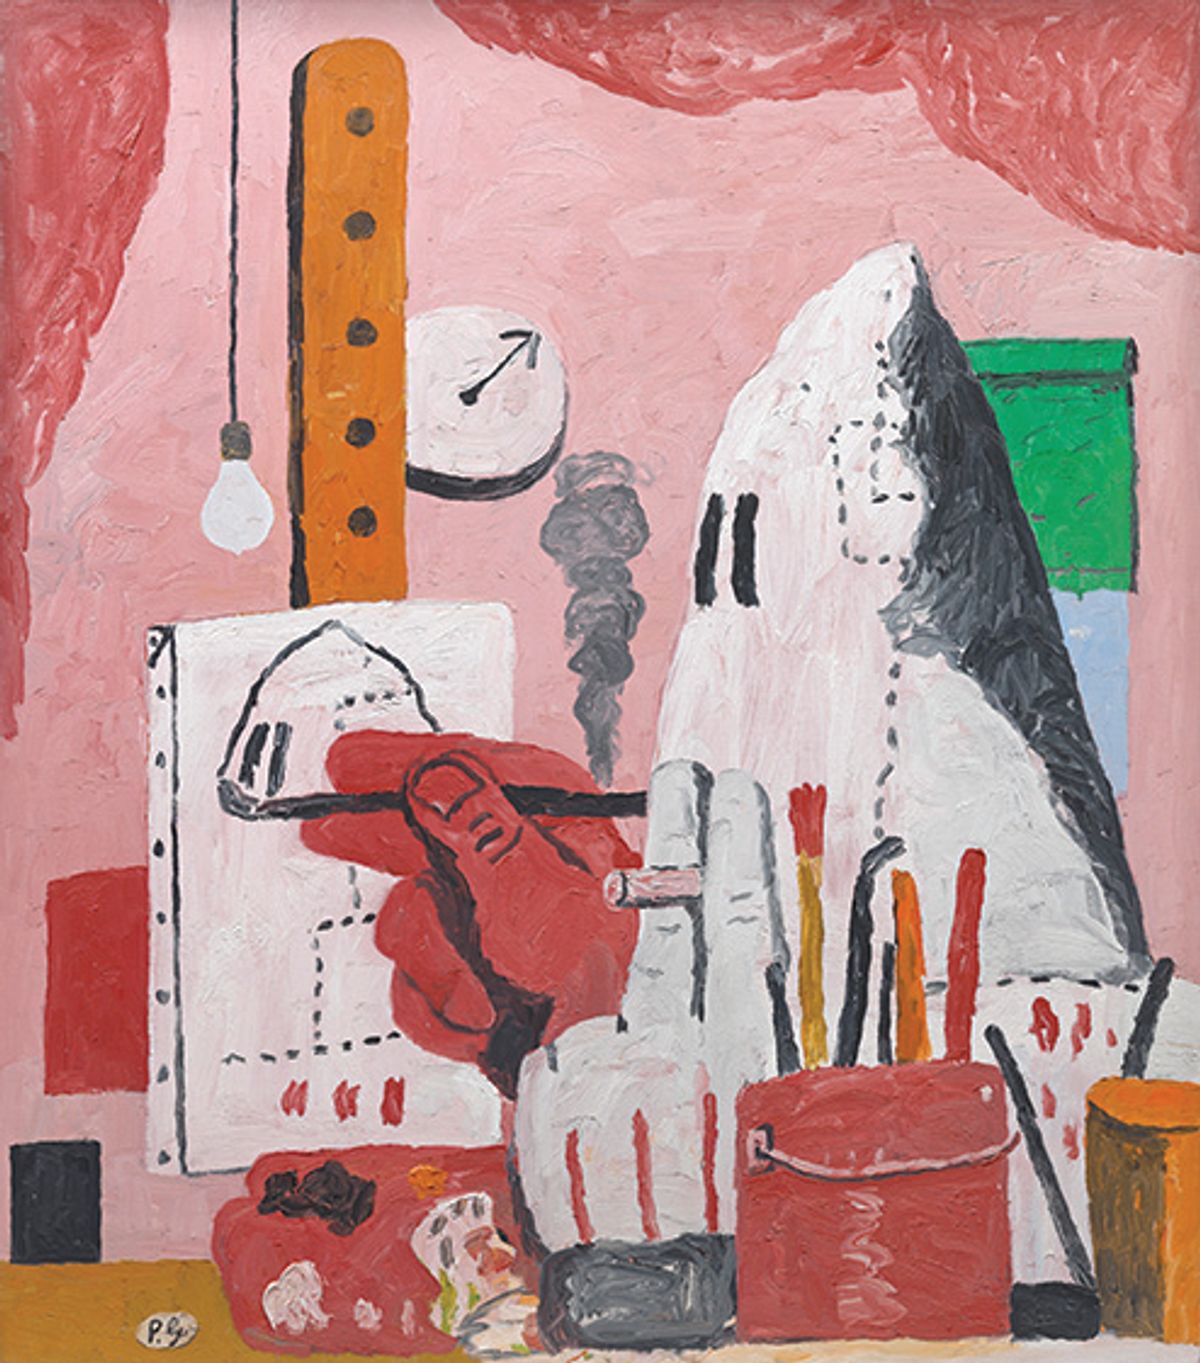 The Studio (1969), one of Philip Guston’s best-known works featuring Ku Klux Klan motifs, will be shown in a separate space in the Boston show, suggesting the artist’s own studio © Estate of Philip Guston, courtesy Hauser & Wirth and Museum of Fine Arts, Boston